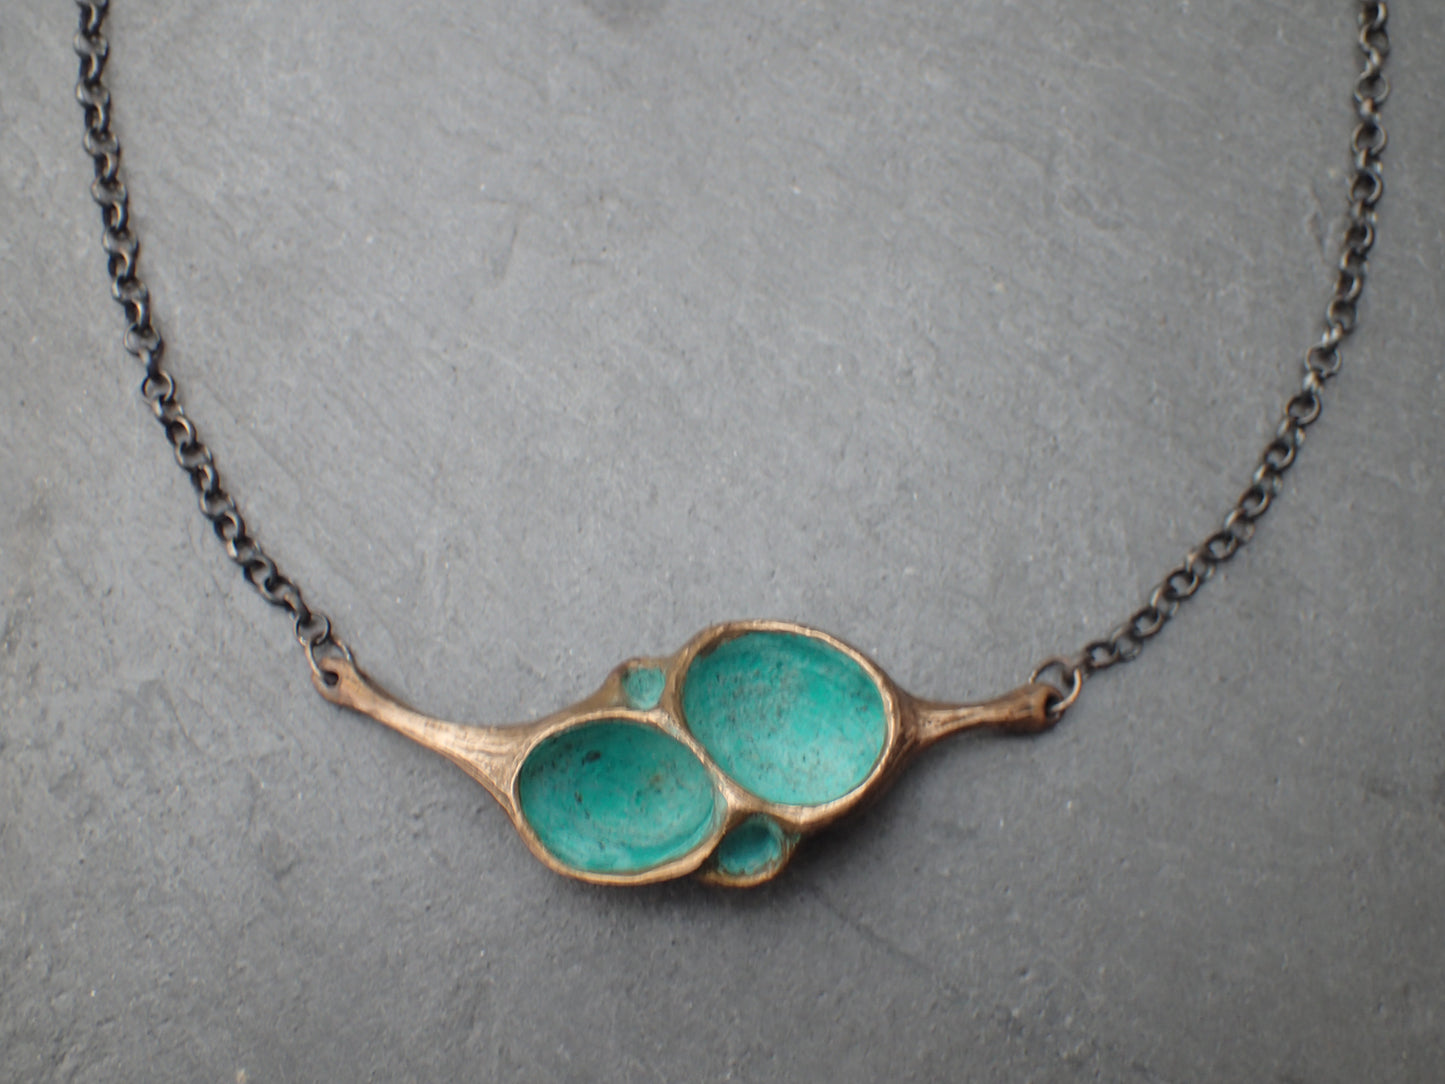 'Artefact' Necklace (single form), Bronze with Turquiose patina, on 4mm silver chain.-Beca Beeby